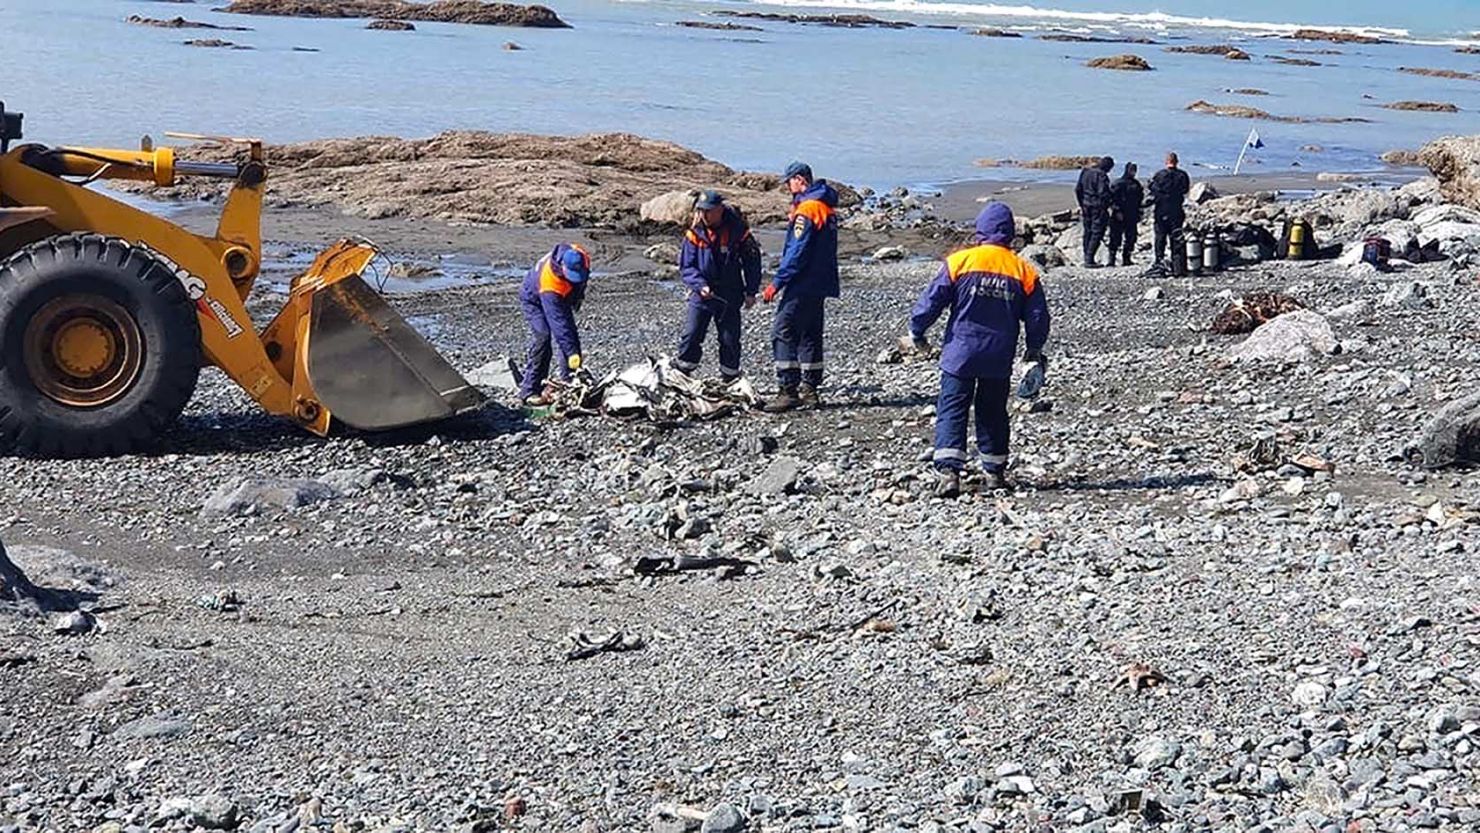 Emergency personnel work near the site where a helicopter carrying tourists crashed at Kurile Lake in the Kronotsky nature reserve on the Kamchatka Peninsula in Russia on Thursday.